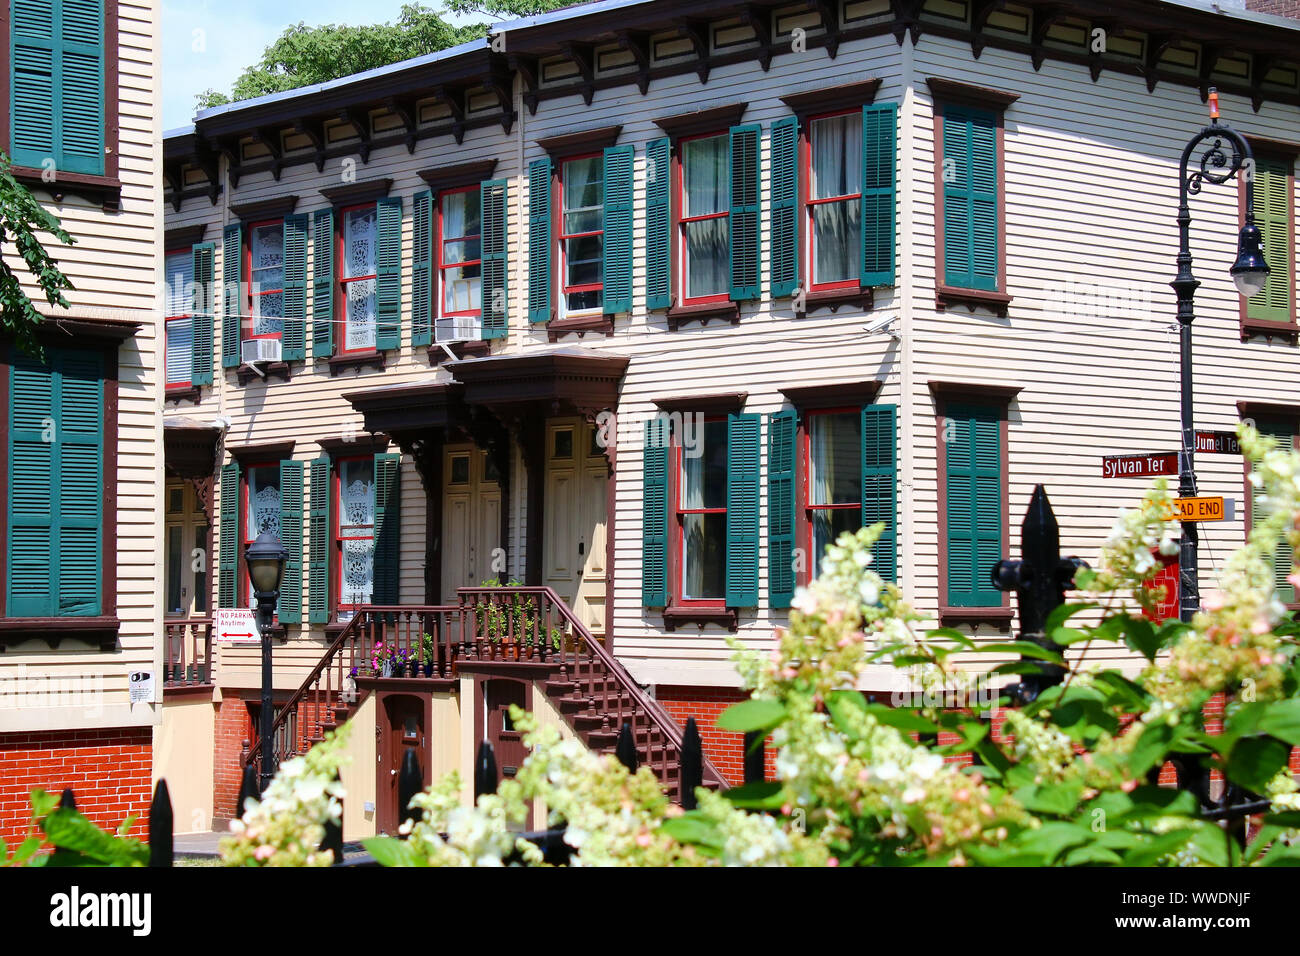 Sylvan Terrace wooden frame houses were built in 1882-1883 and are part of Jumel Terrace Historic District in Washington Heights, Manhattan on August Stock Photo